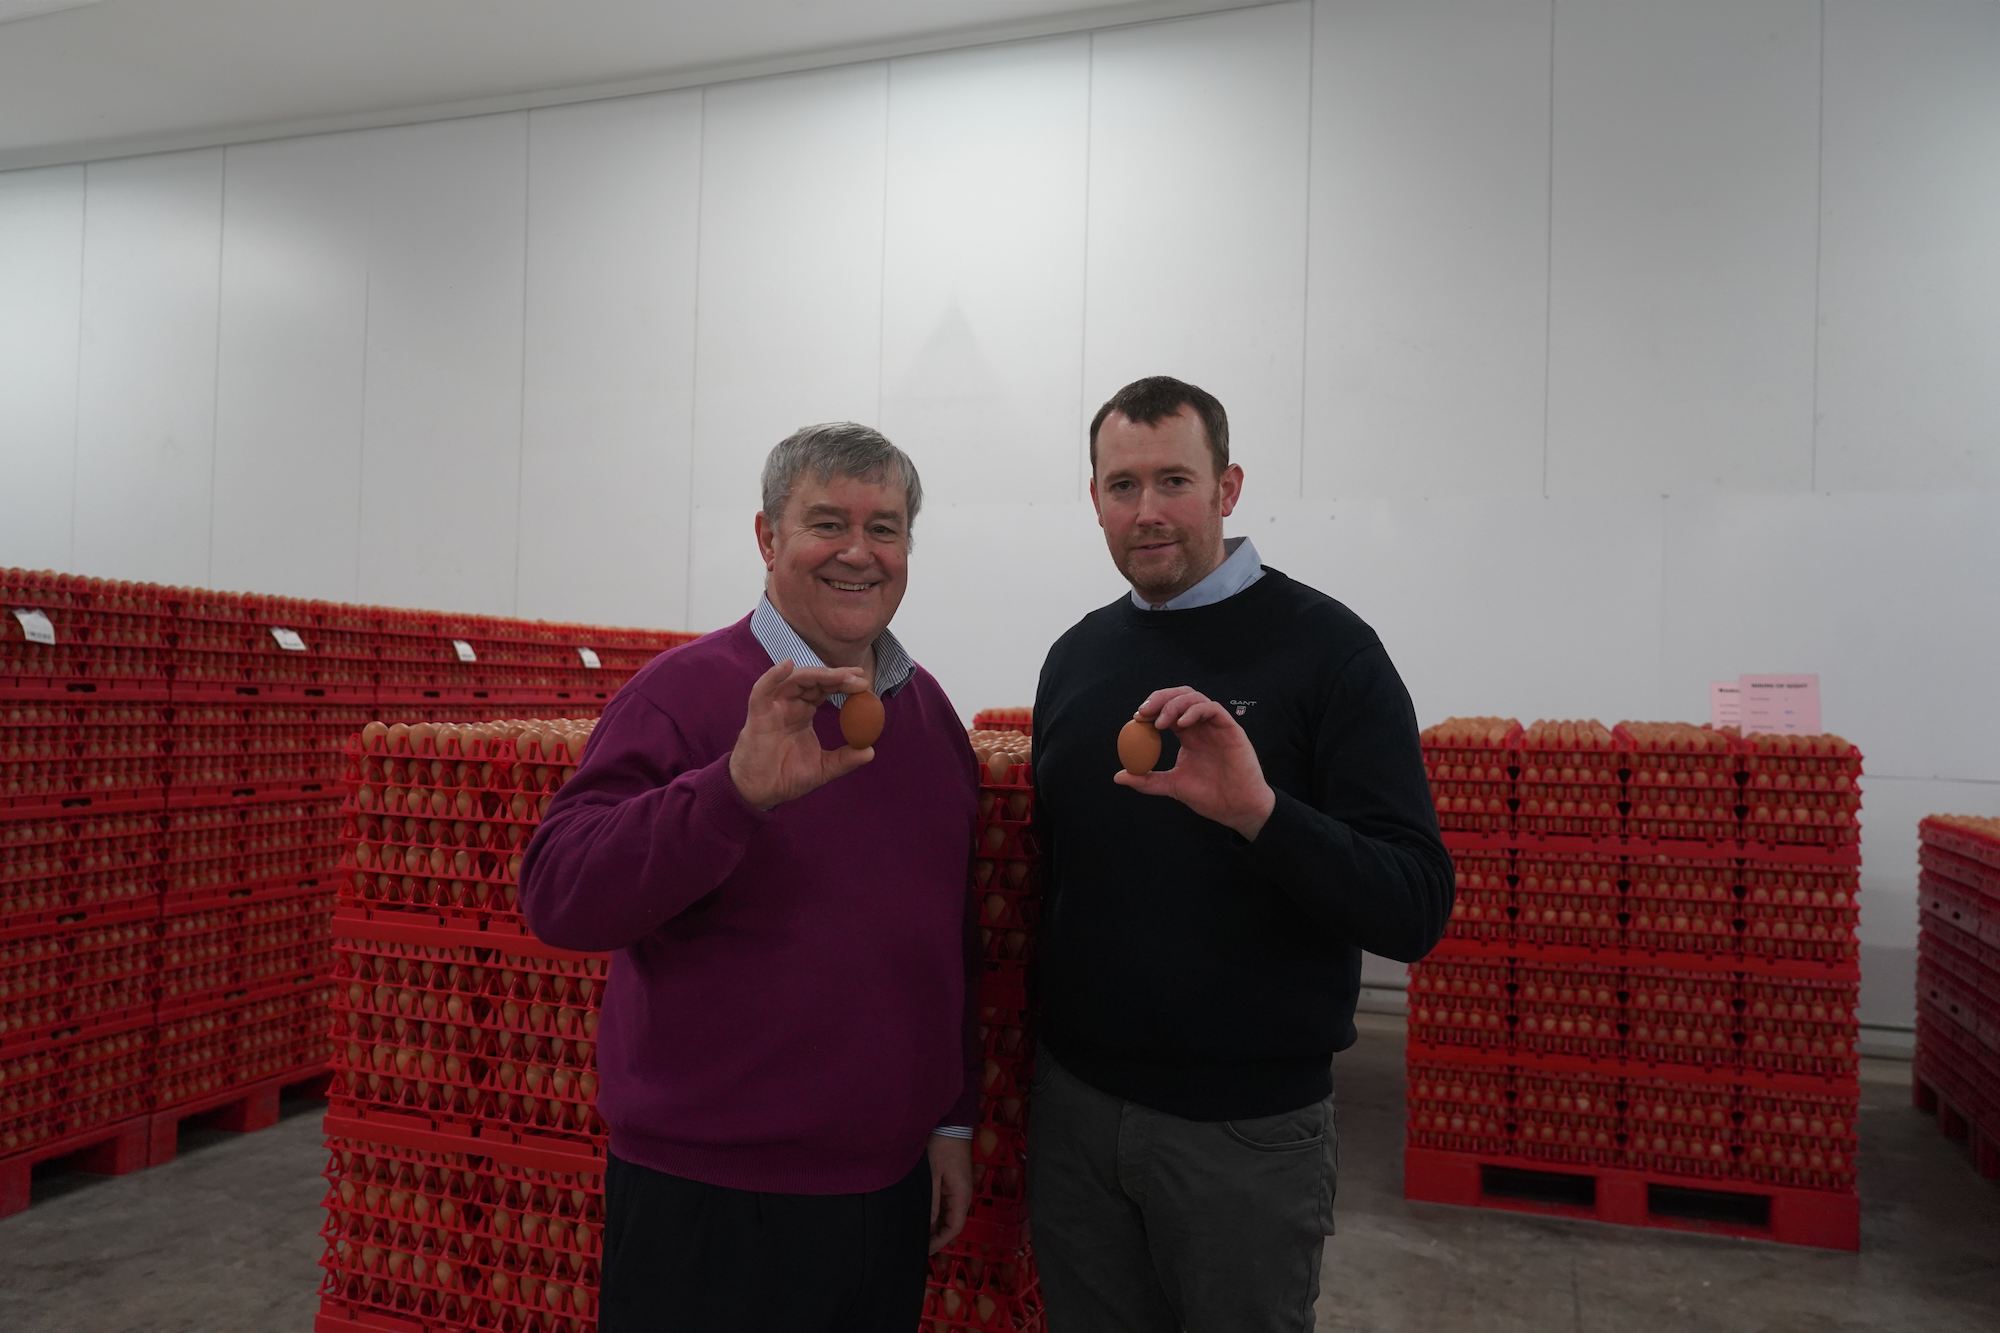 Family-owned egg producer Farmlay hands over reigns to next generation